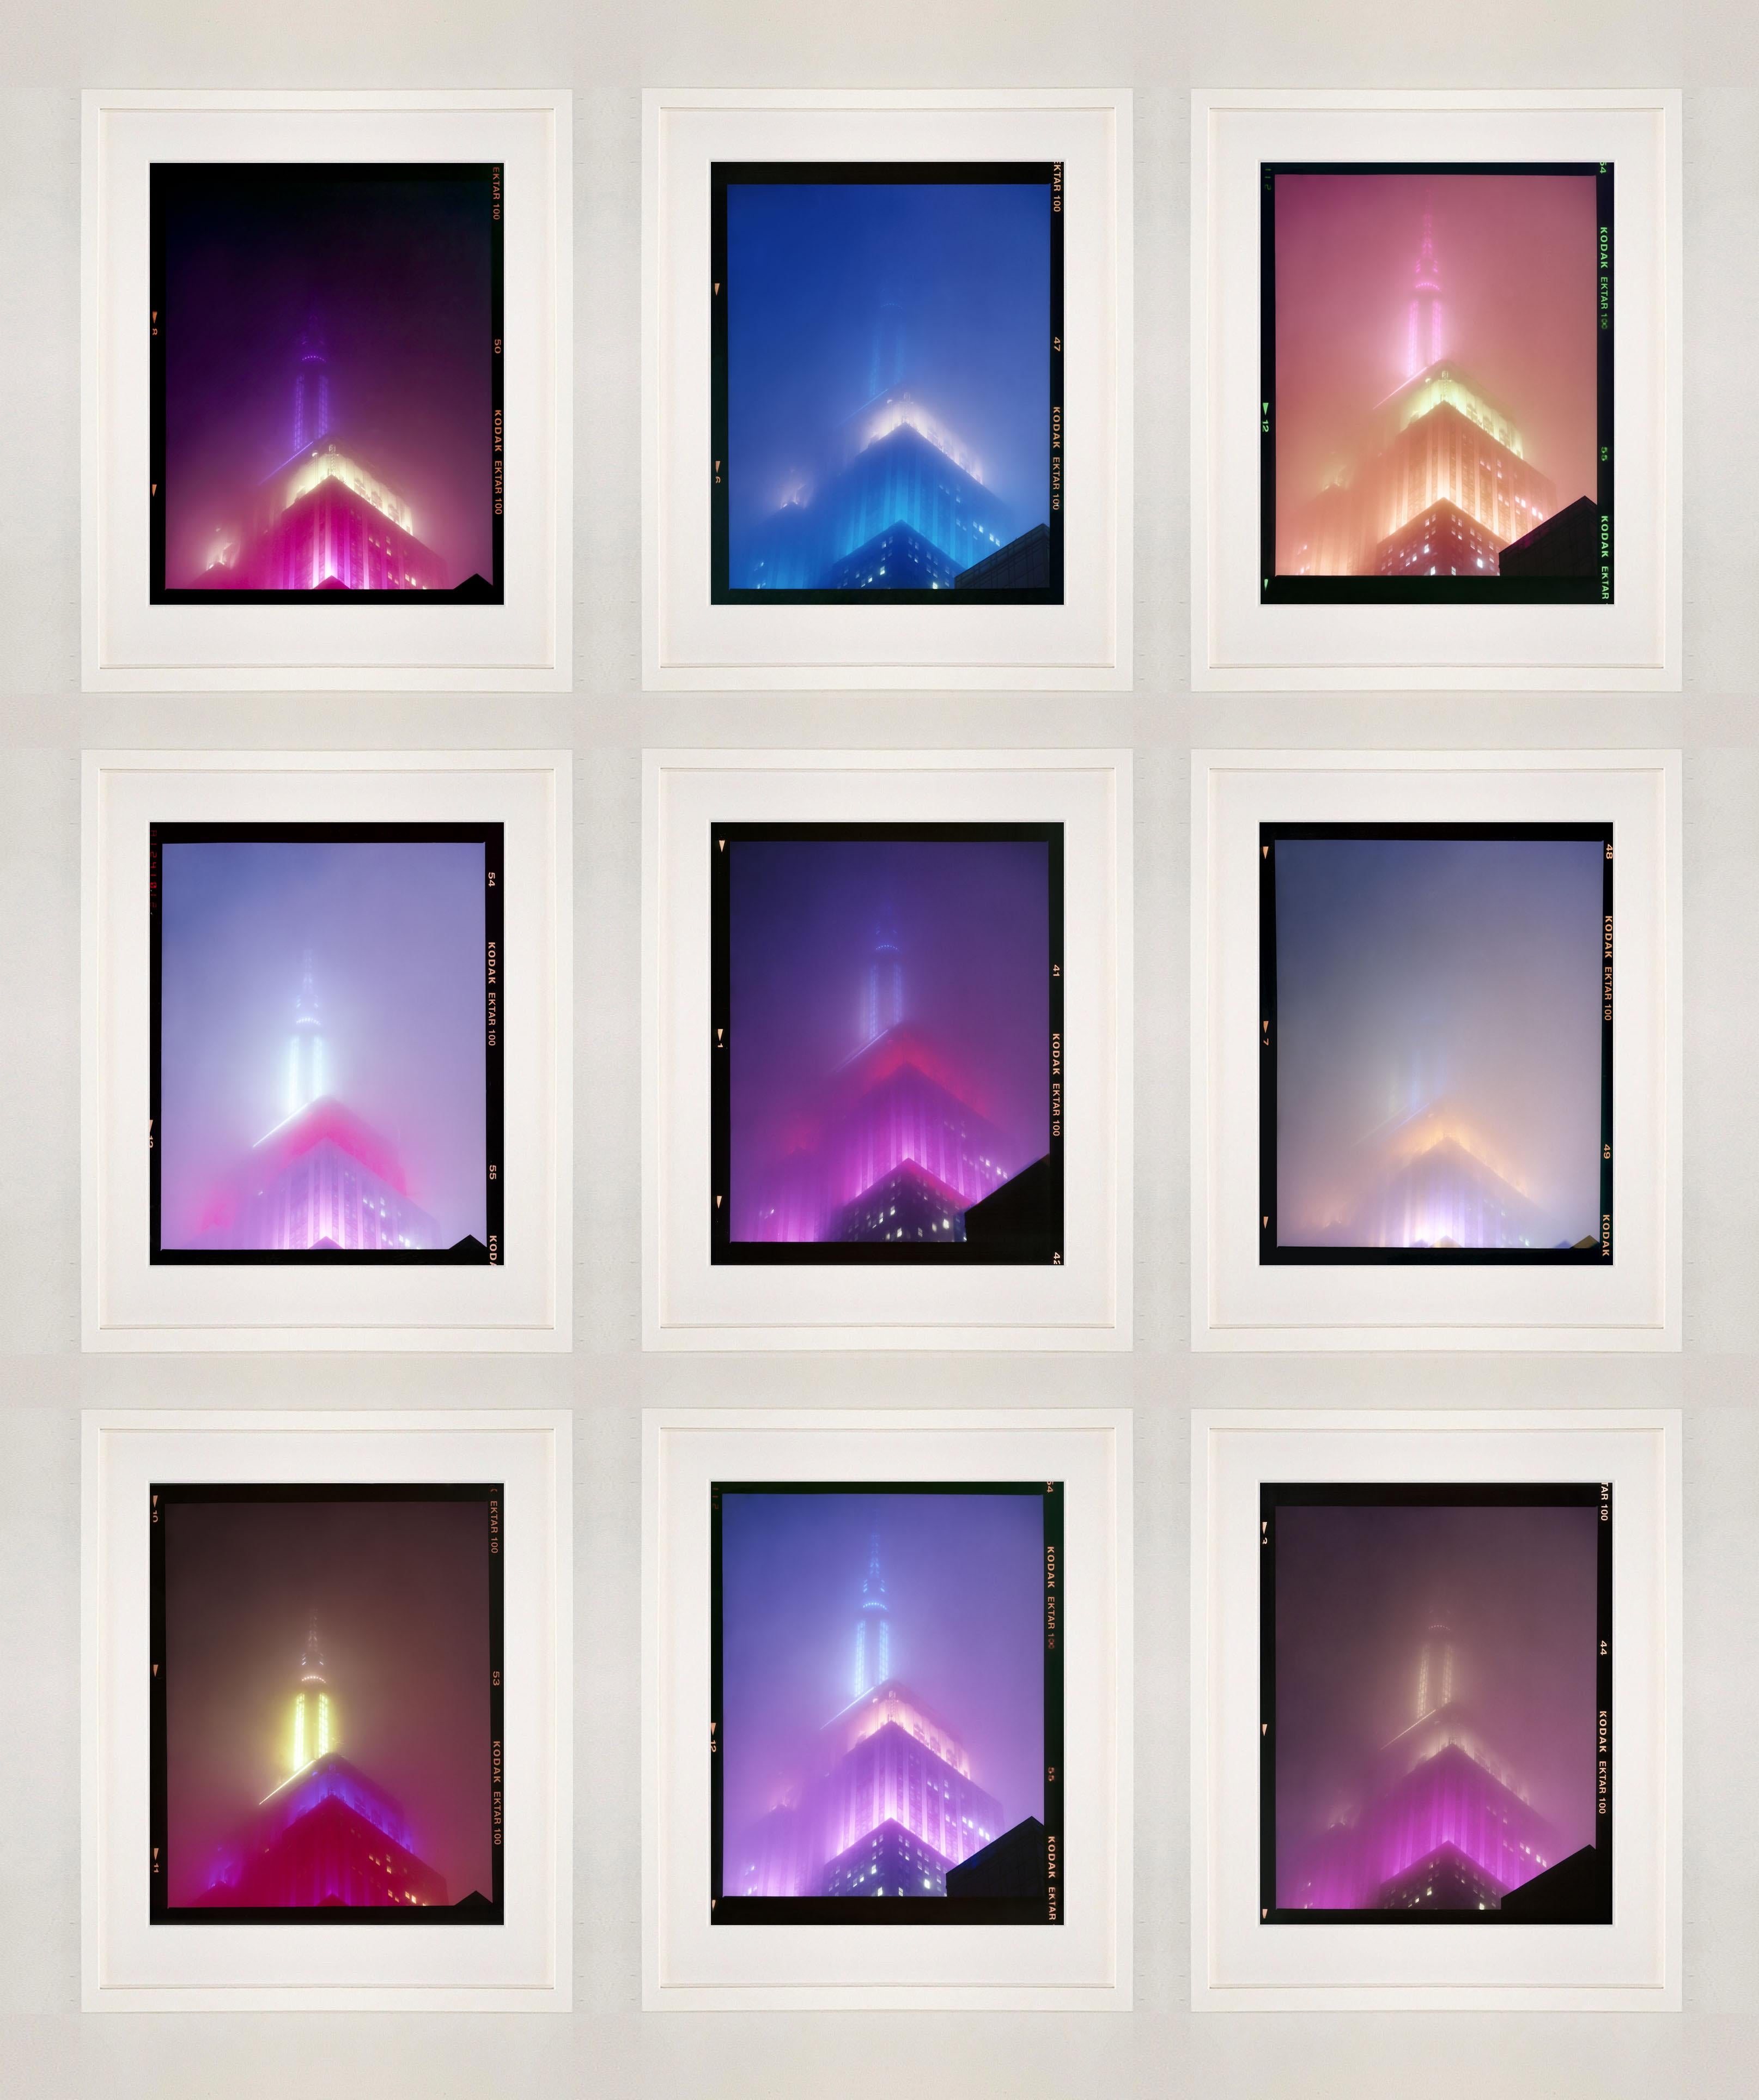 'NOMAD III (Film Rebate)', New York. Richard Heeps has photographed the iconic Empire State building in the mist. The NOMAD sequence of photographs capture the art deco architecture illuminated by changing colours, and is part of Richard's street